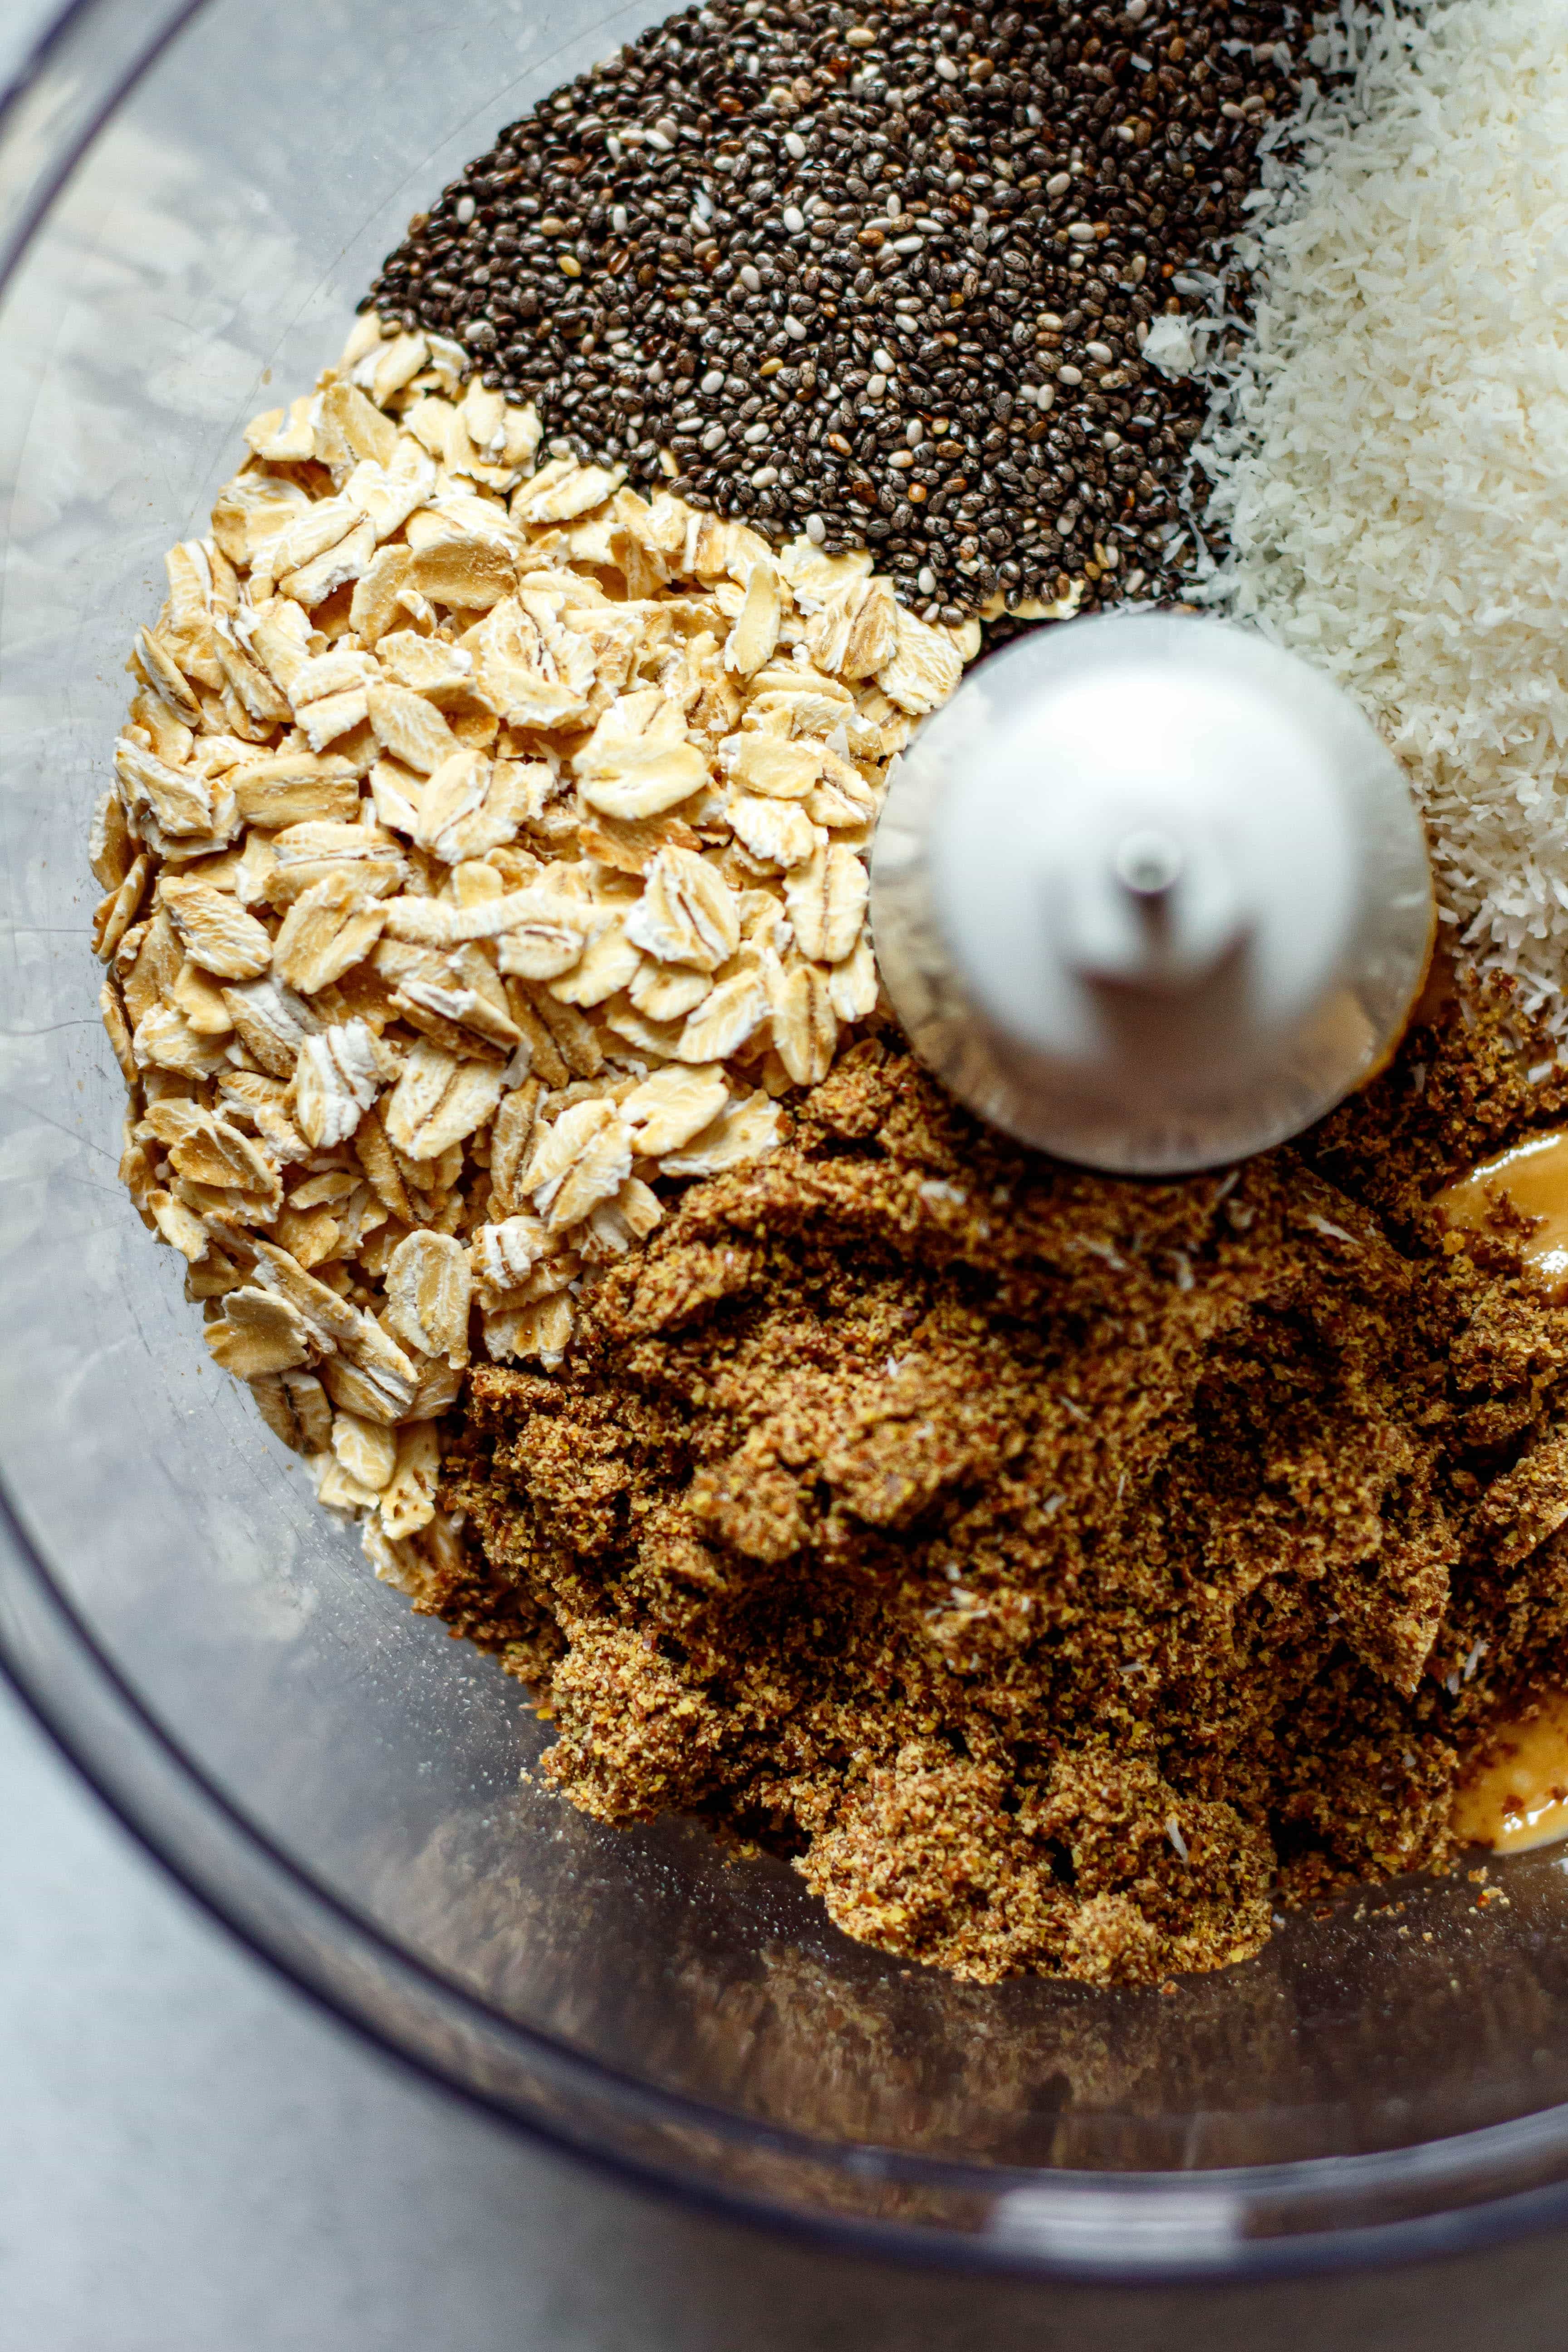 oats, chia seeds, flax seeds, and coconut in a food processor